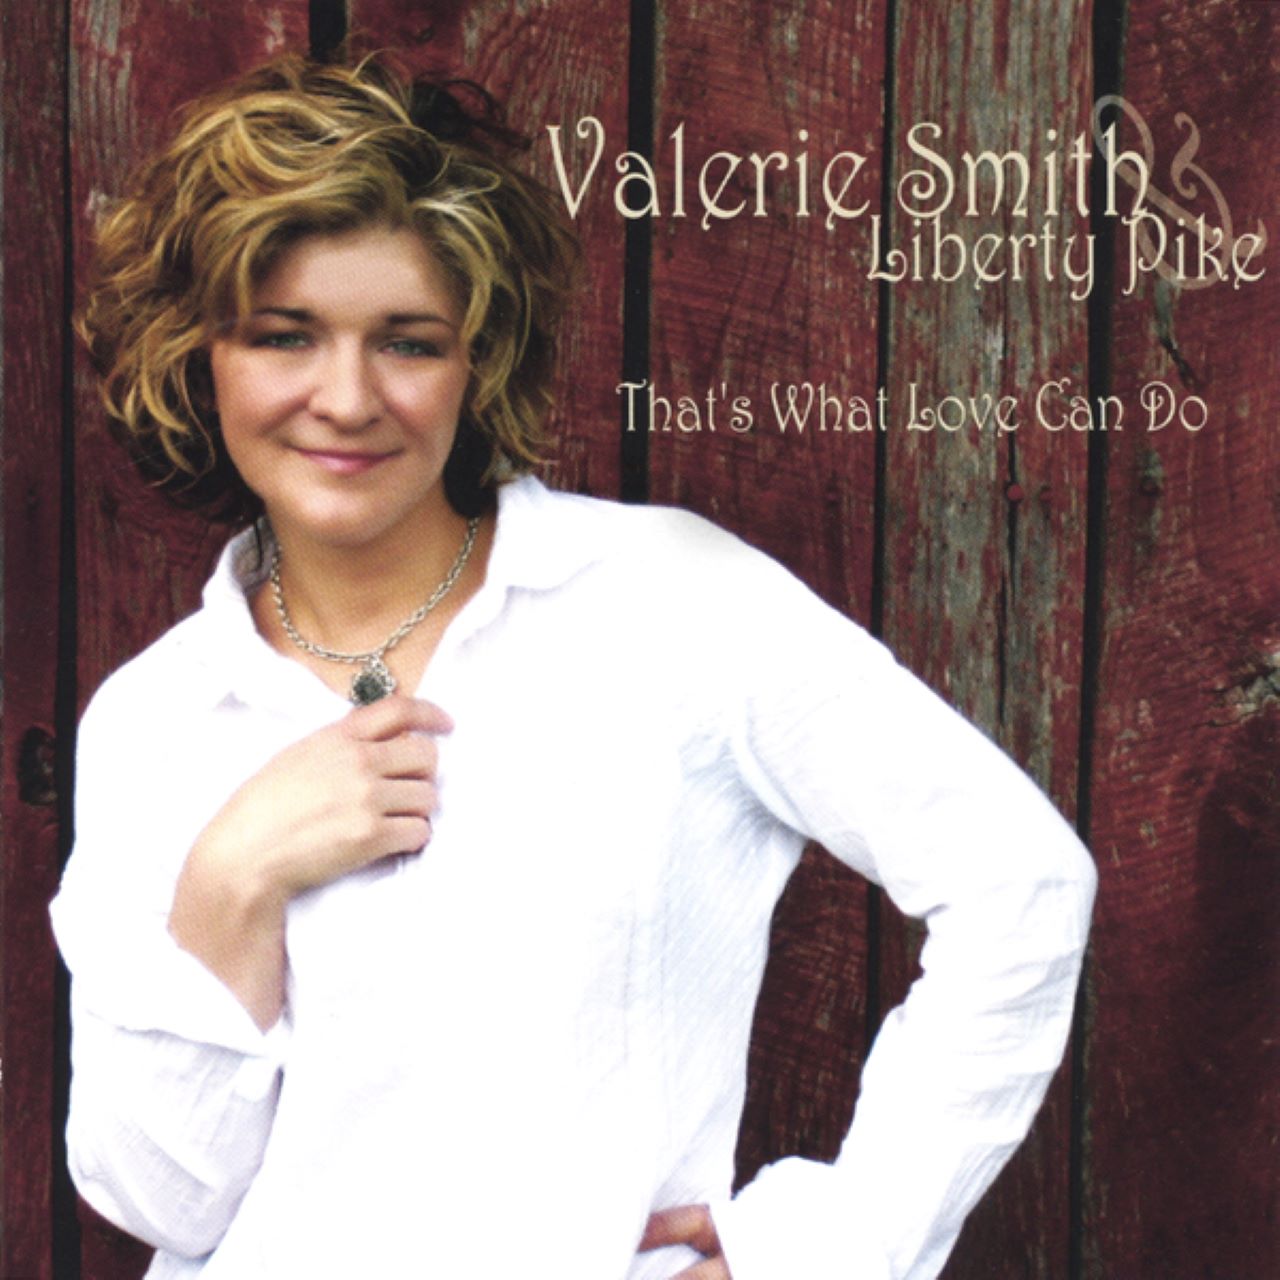 Valerie Smith & Liberty Pike - That’s What Love Can Do cover album